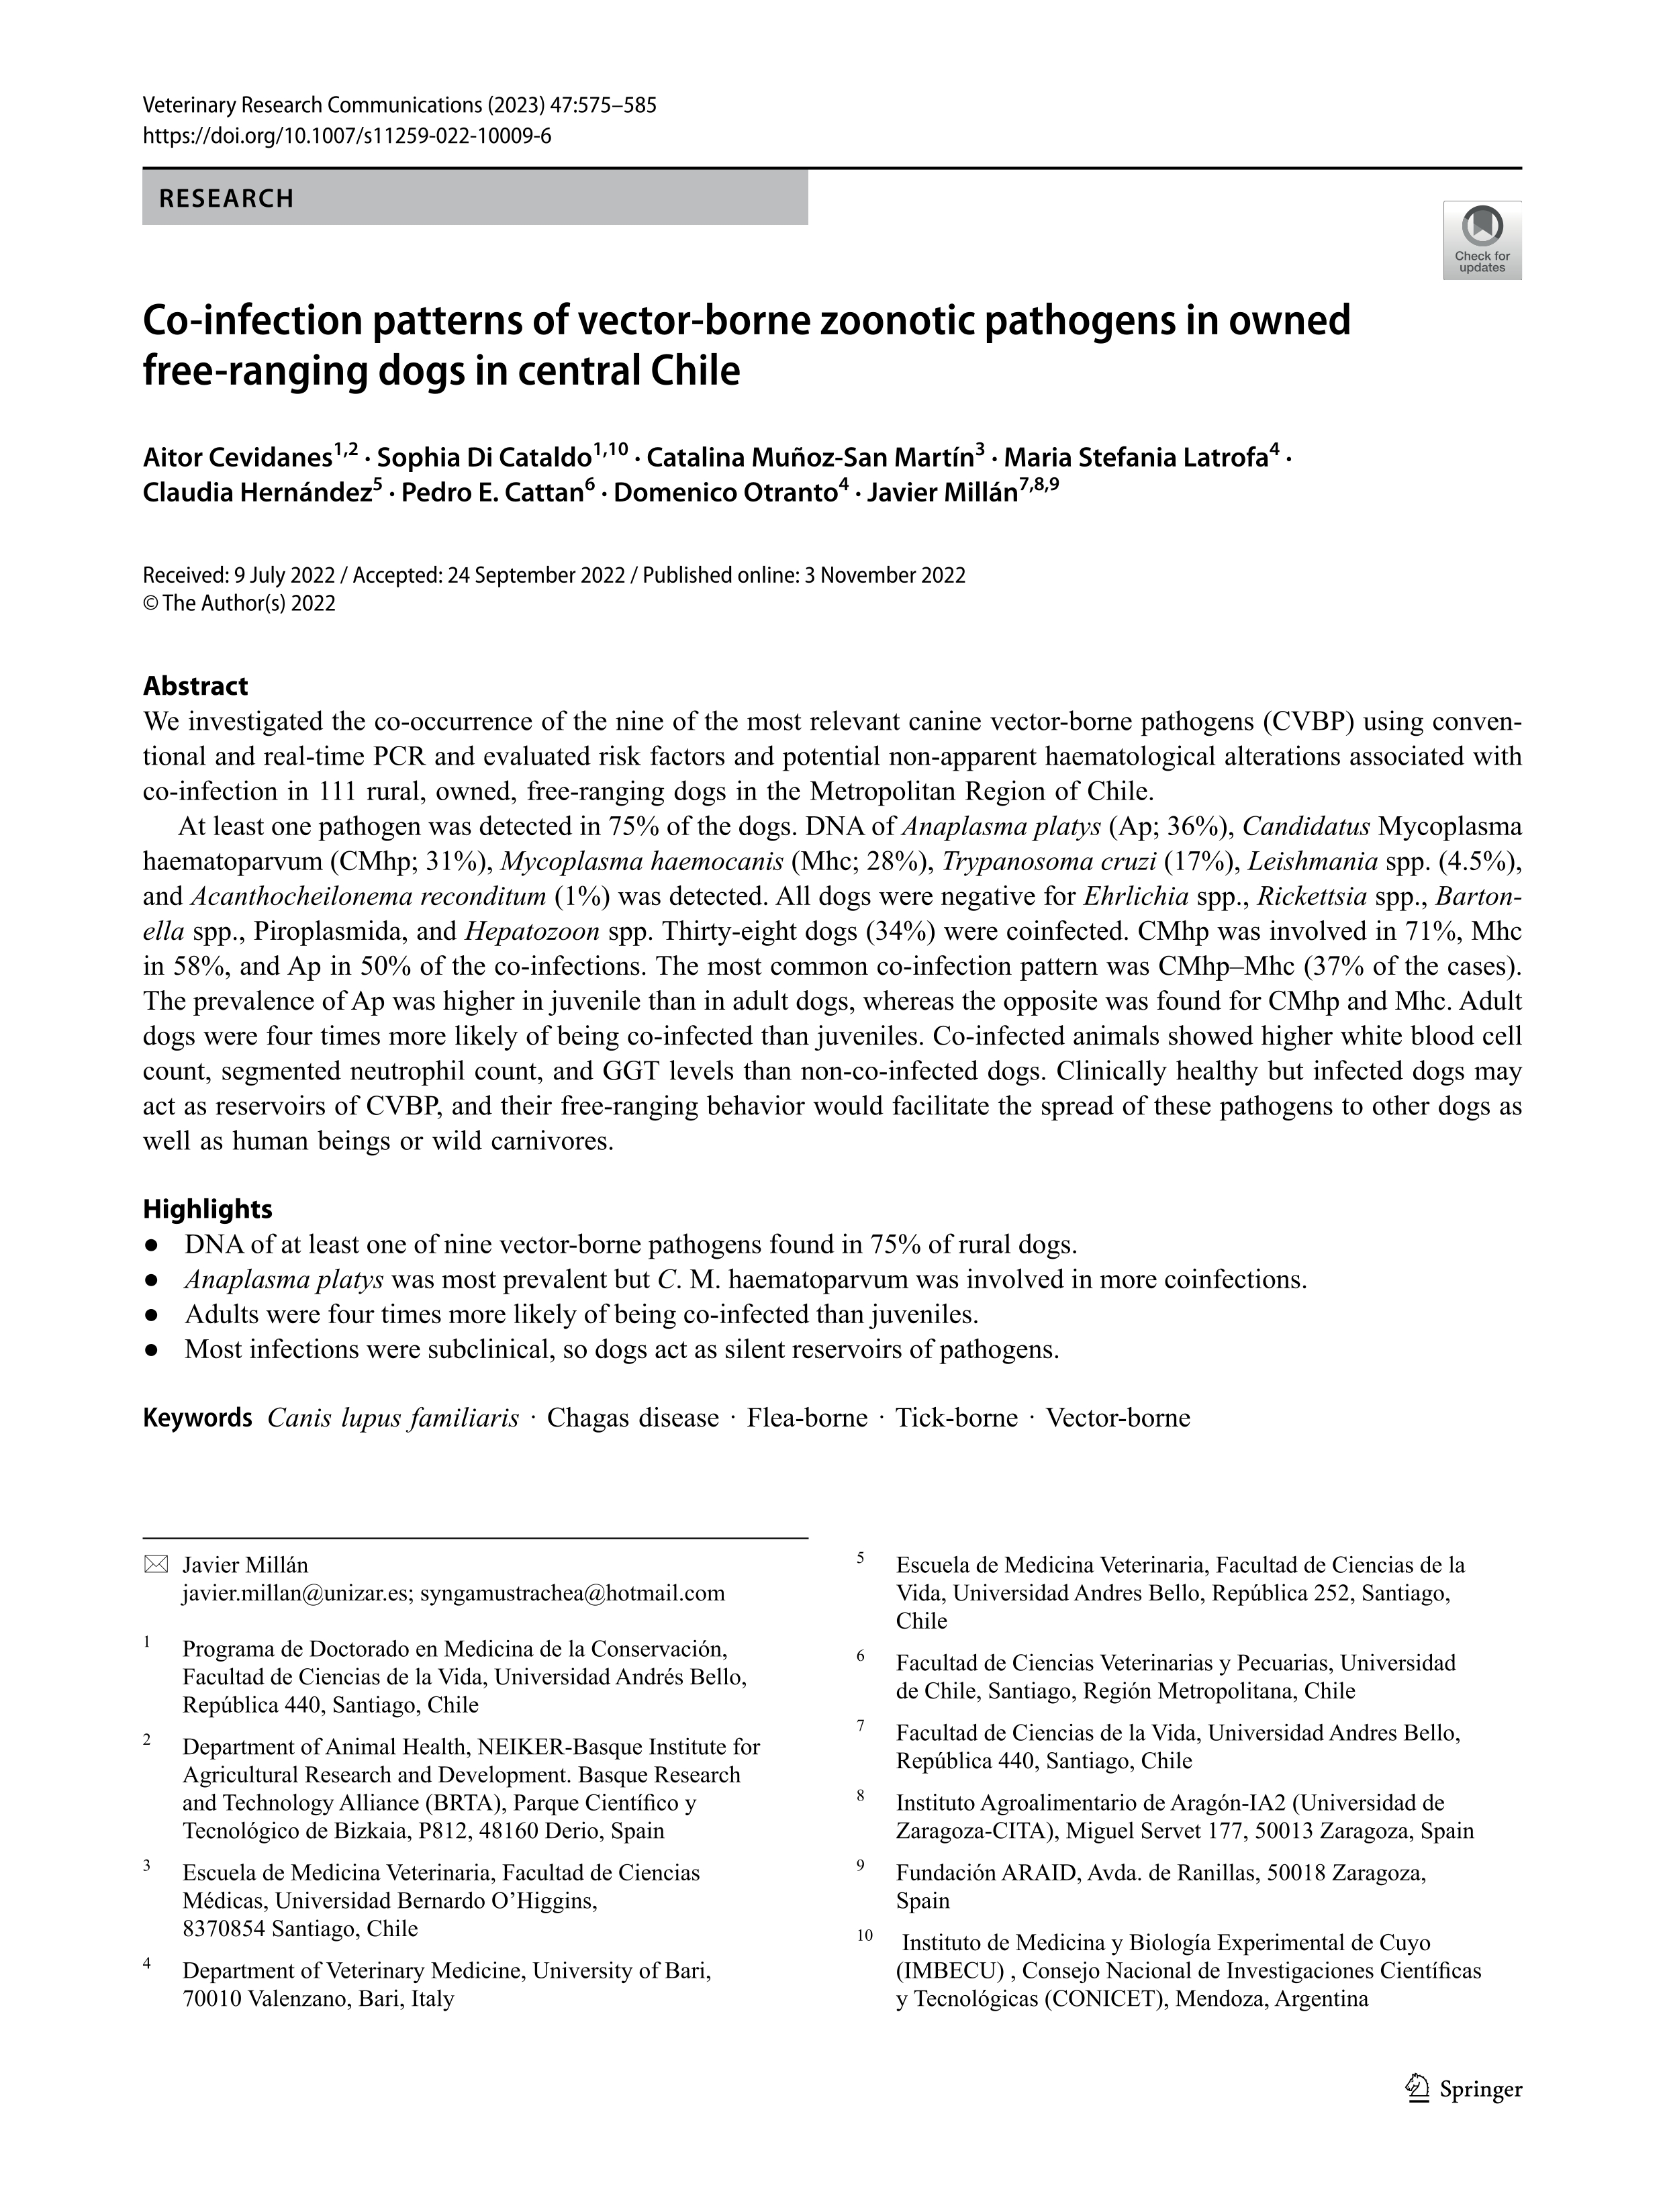 Co-infection patterns of vector-borne zoonotic pathogens in owned free-ranging dogs in central Chile